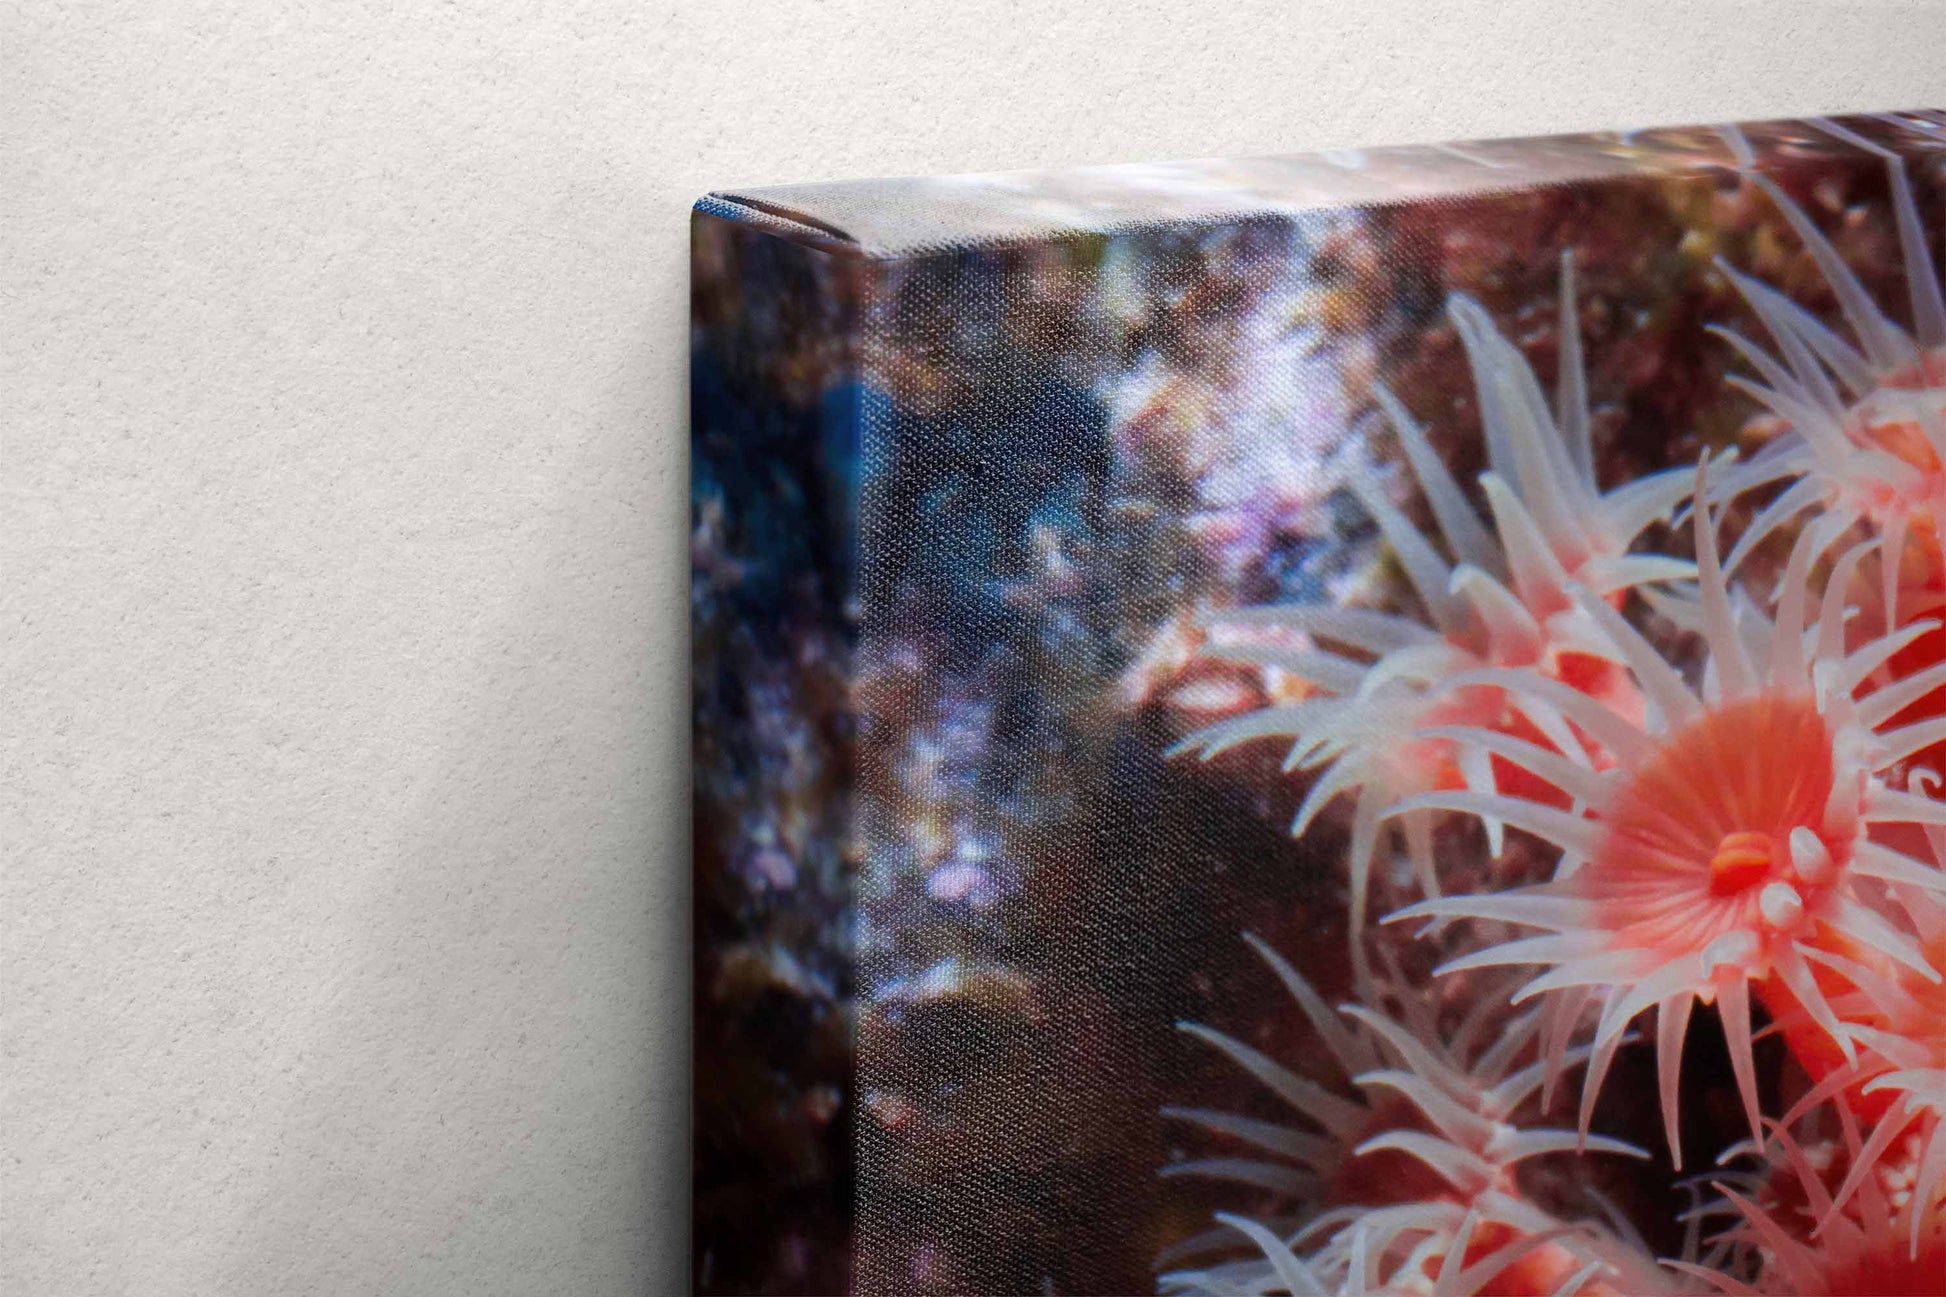 Corner detail of the canvas wrap showing the texture and vibrancy of the red zoanthid underwater photograph.